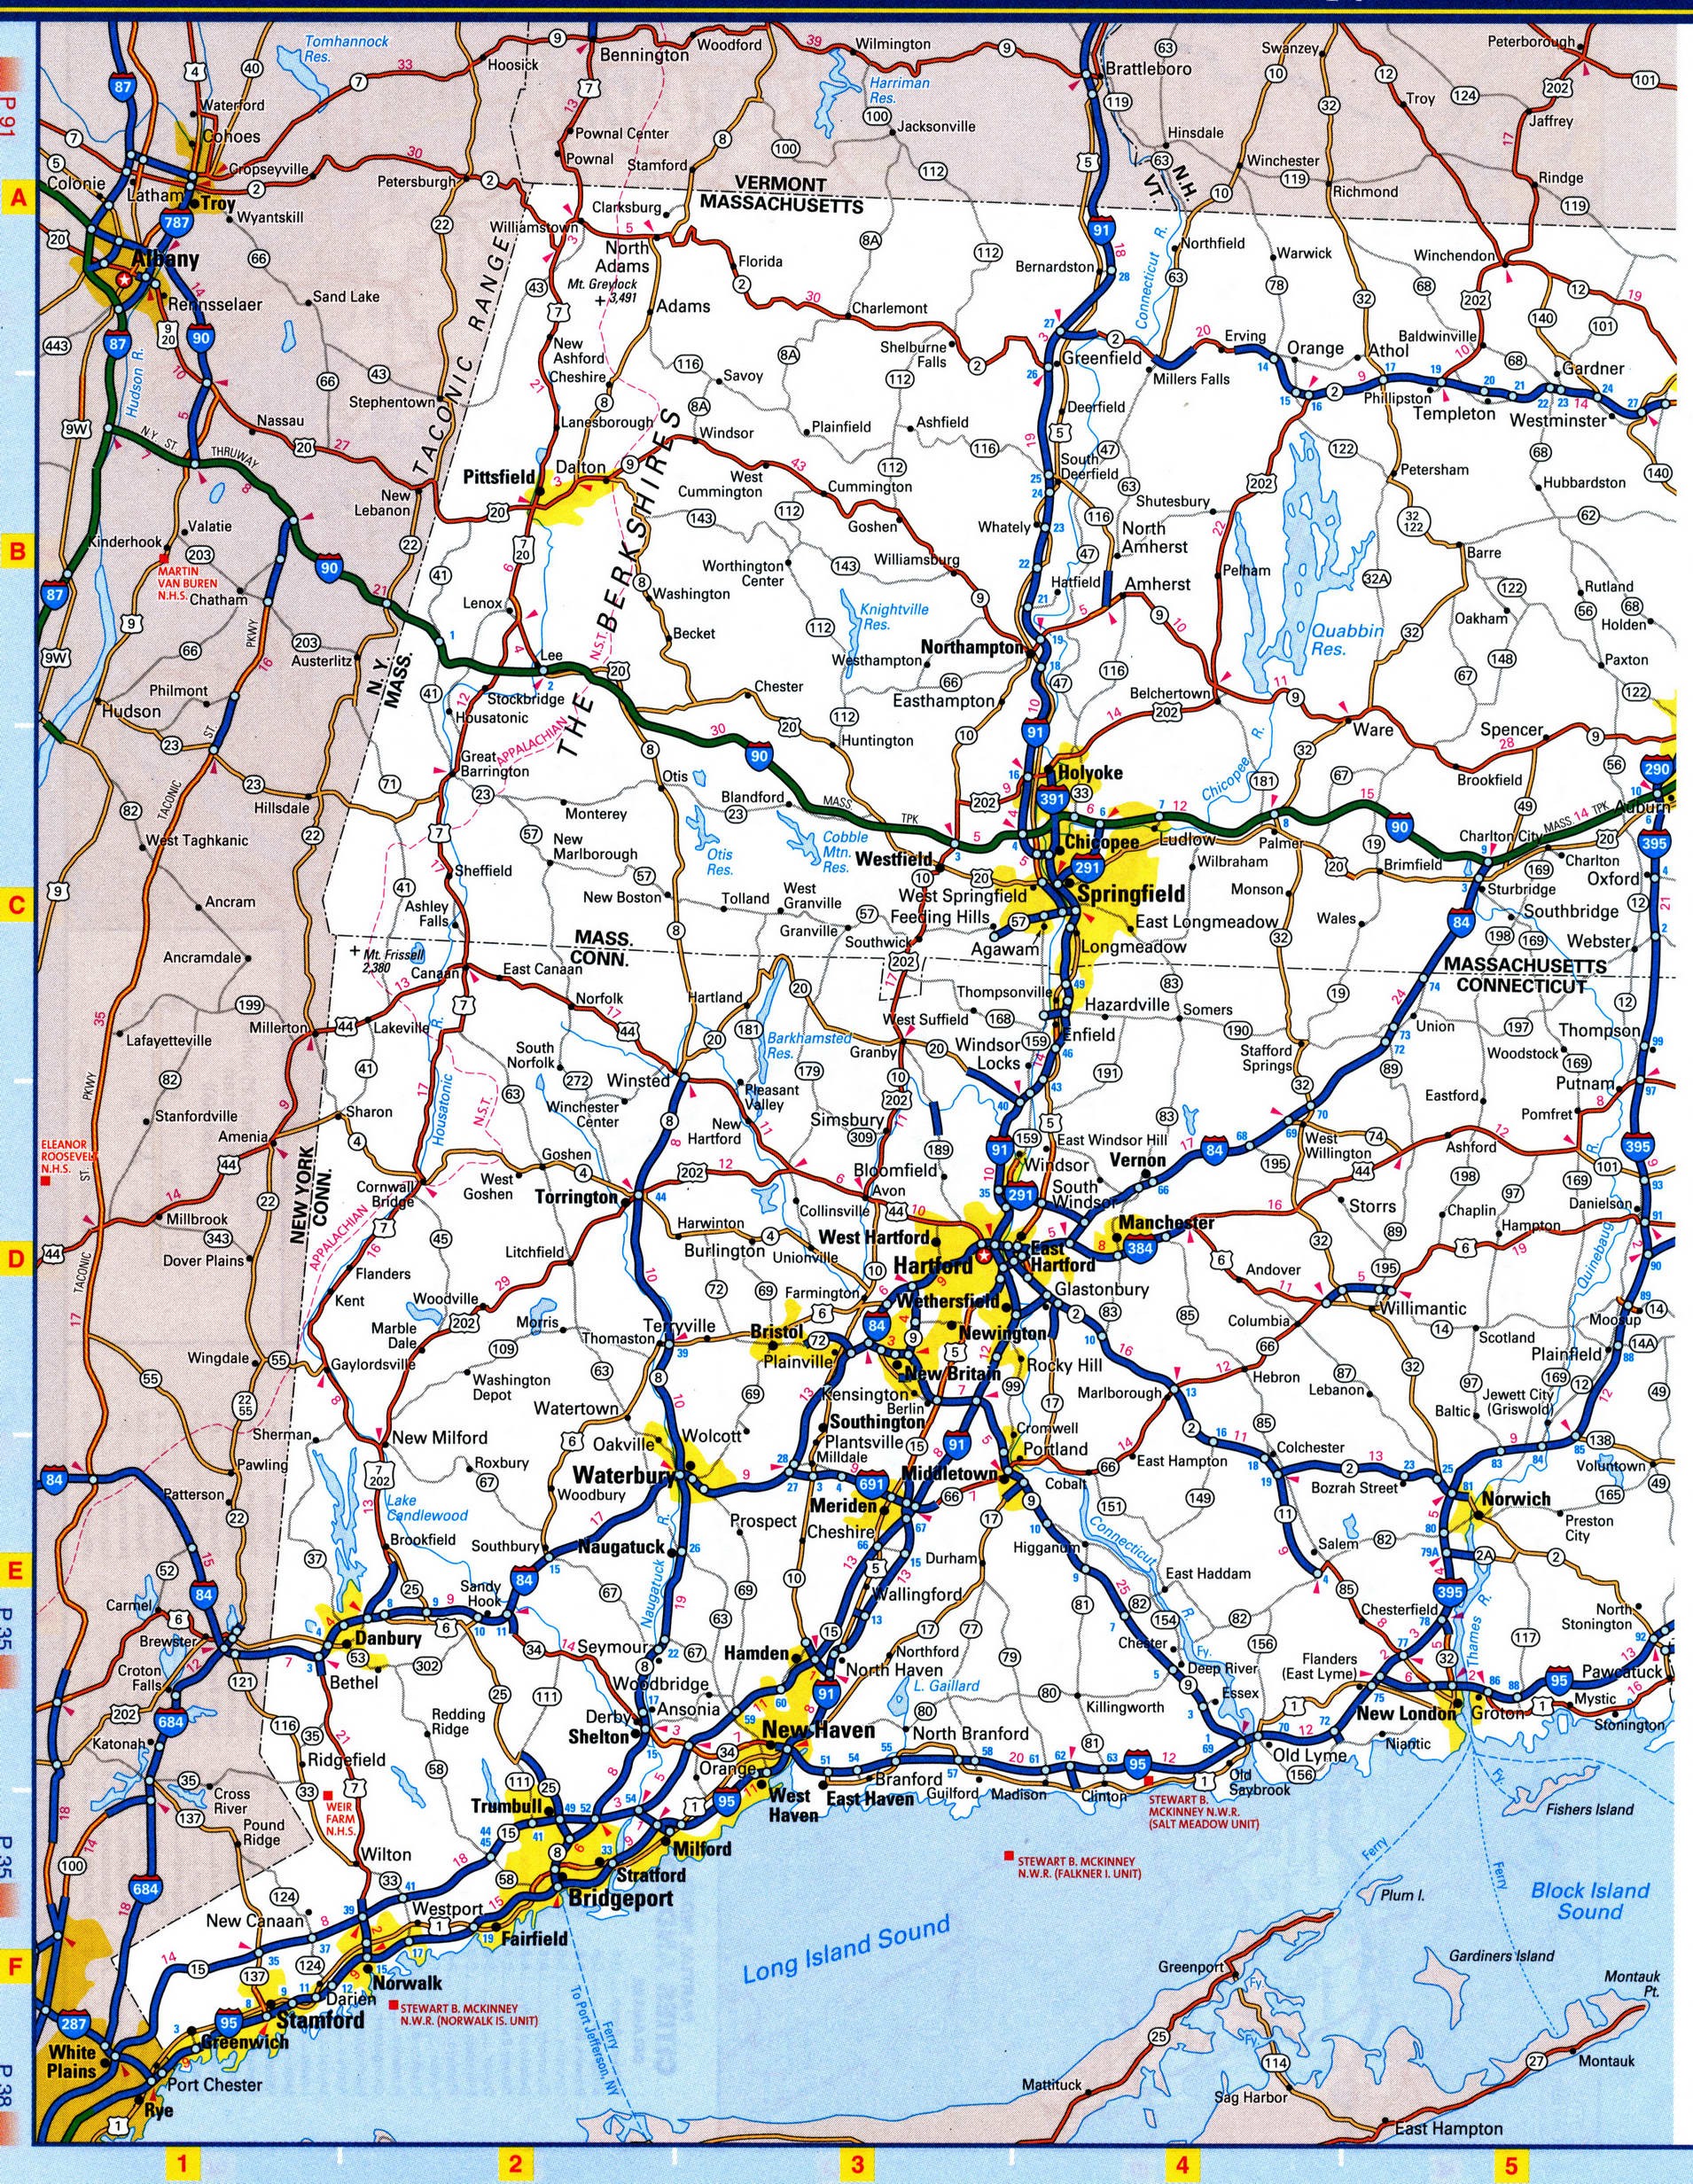 Massachusetts map with national and states parks